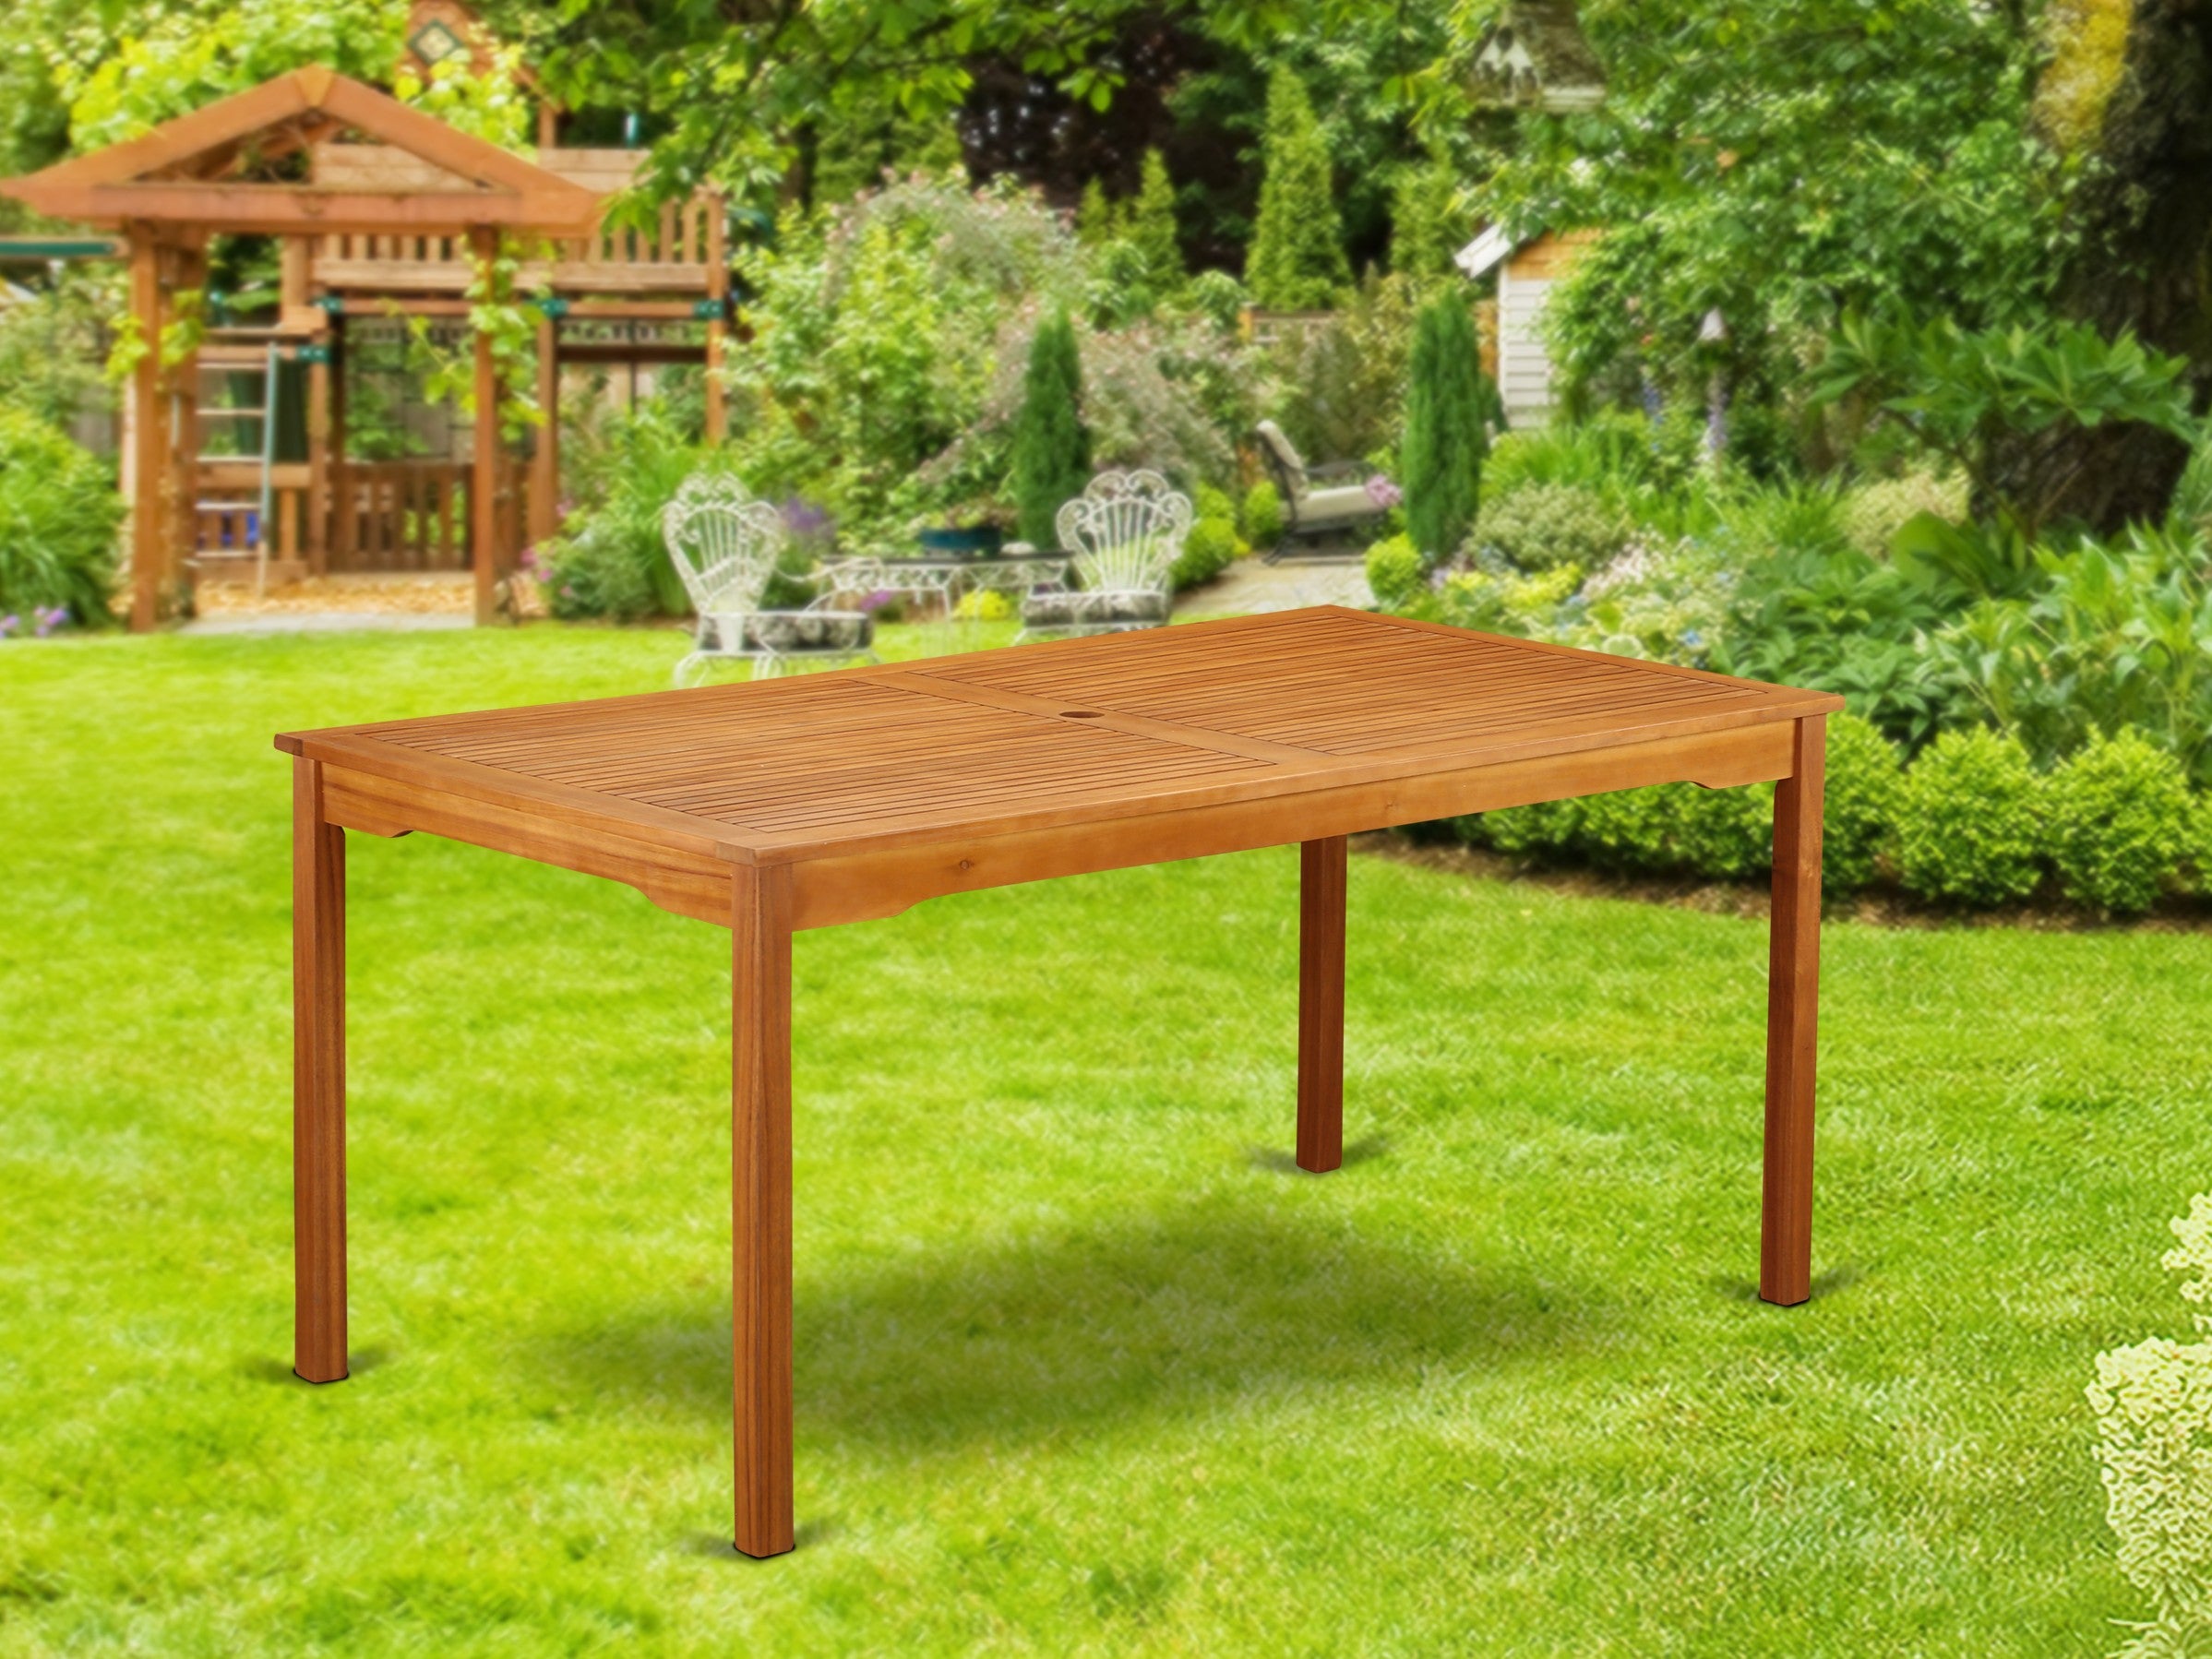 BCMTRNA Rectangular Terrace Acacia wood Dining Table - Natural Oil Finish- Extension butterfly leaf